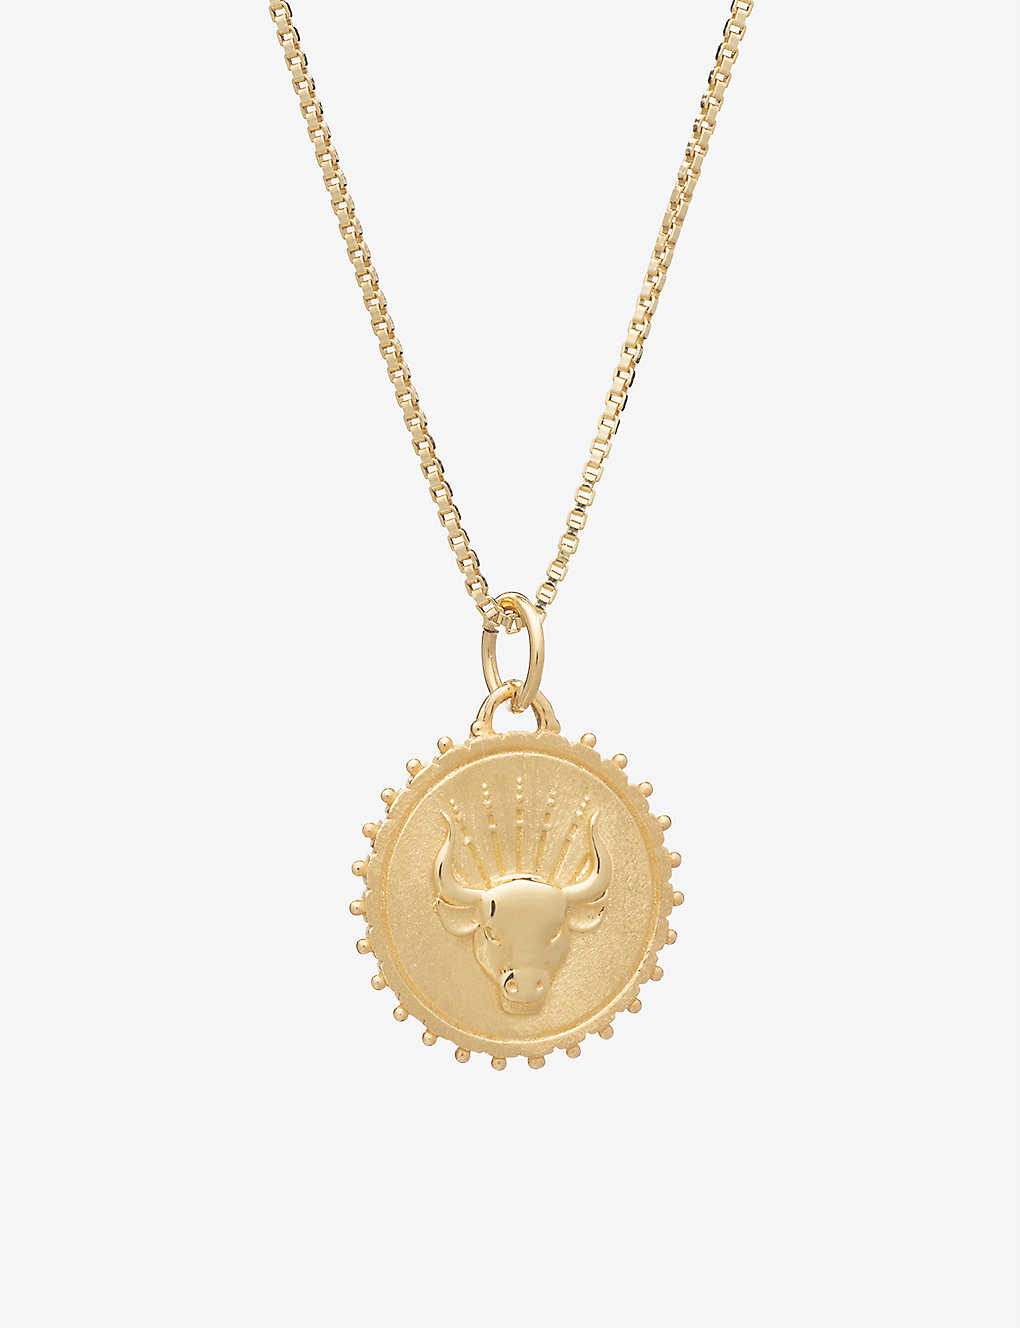 Rachel Jackson Zodiac Coin Taurus Short 22ct Gold-plated Sterling Silver Necklace In 22 Carat Gold Plated